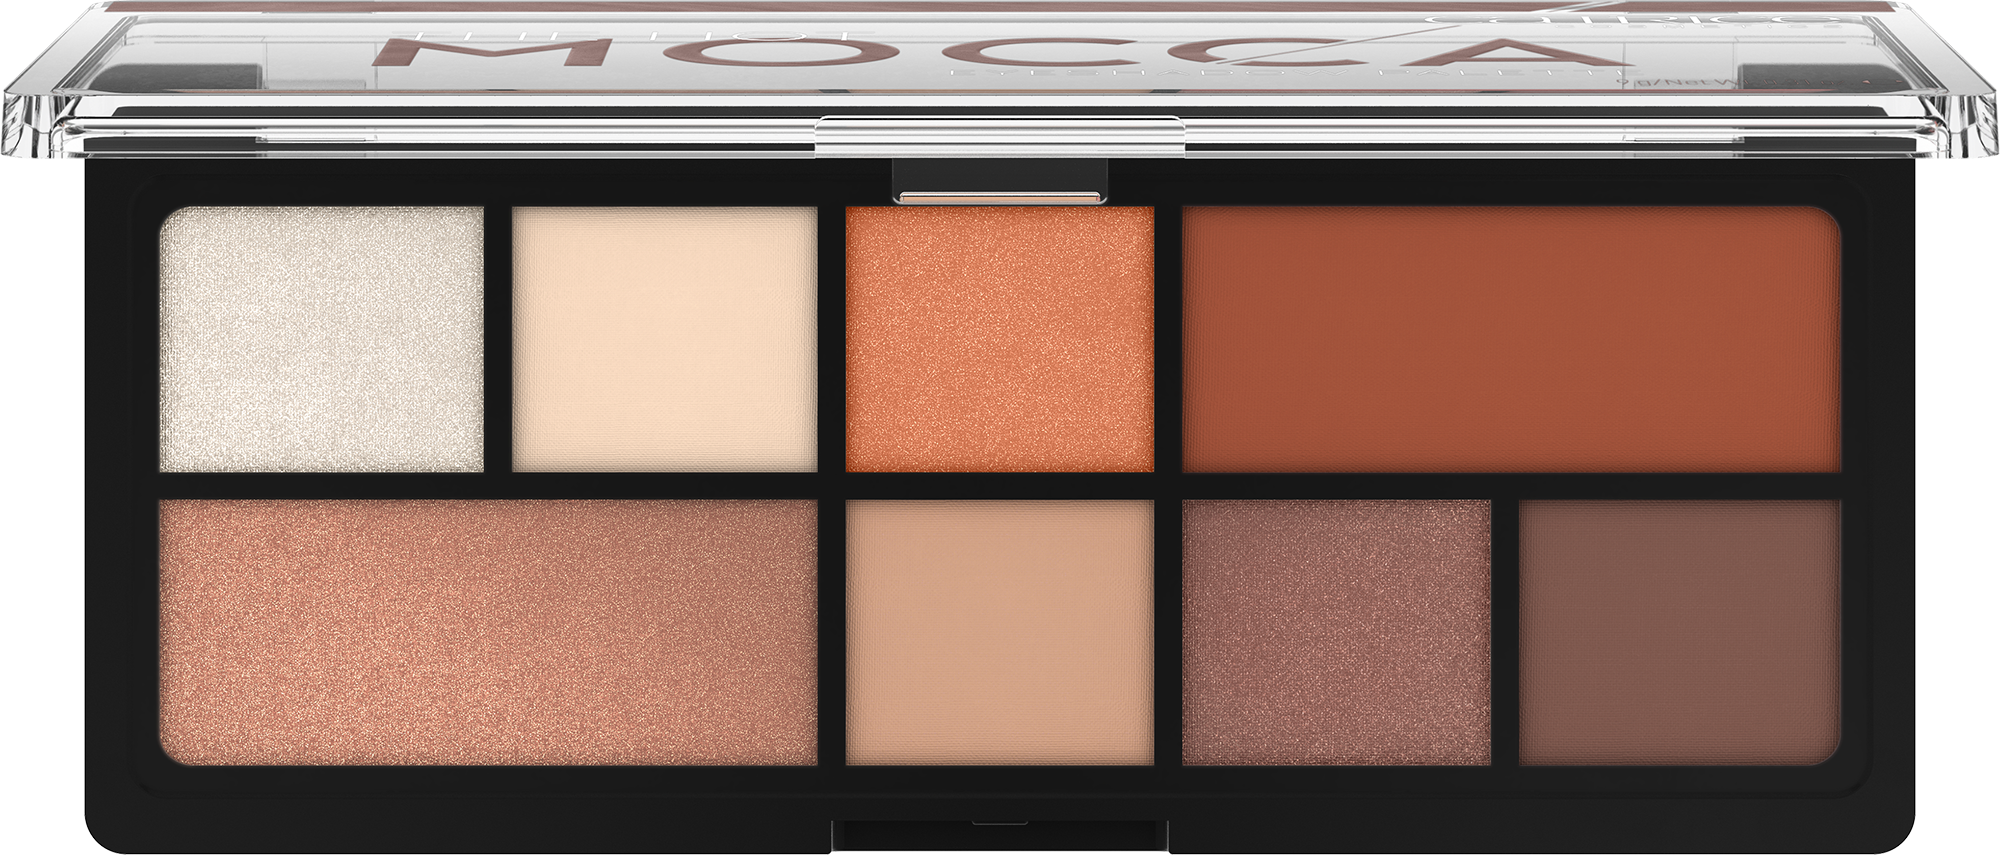 The Hot Mocca Eyeshadow Palette